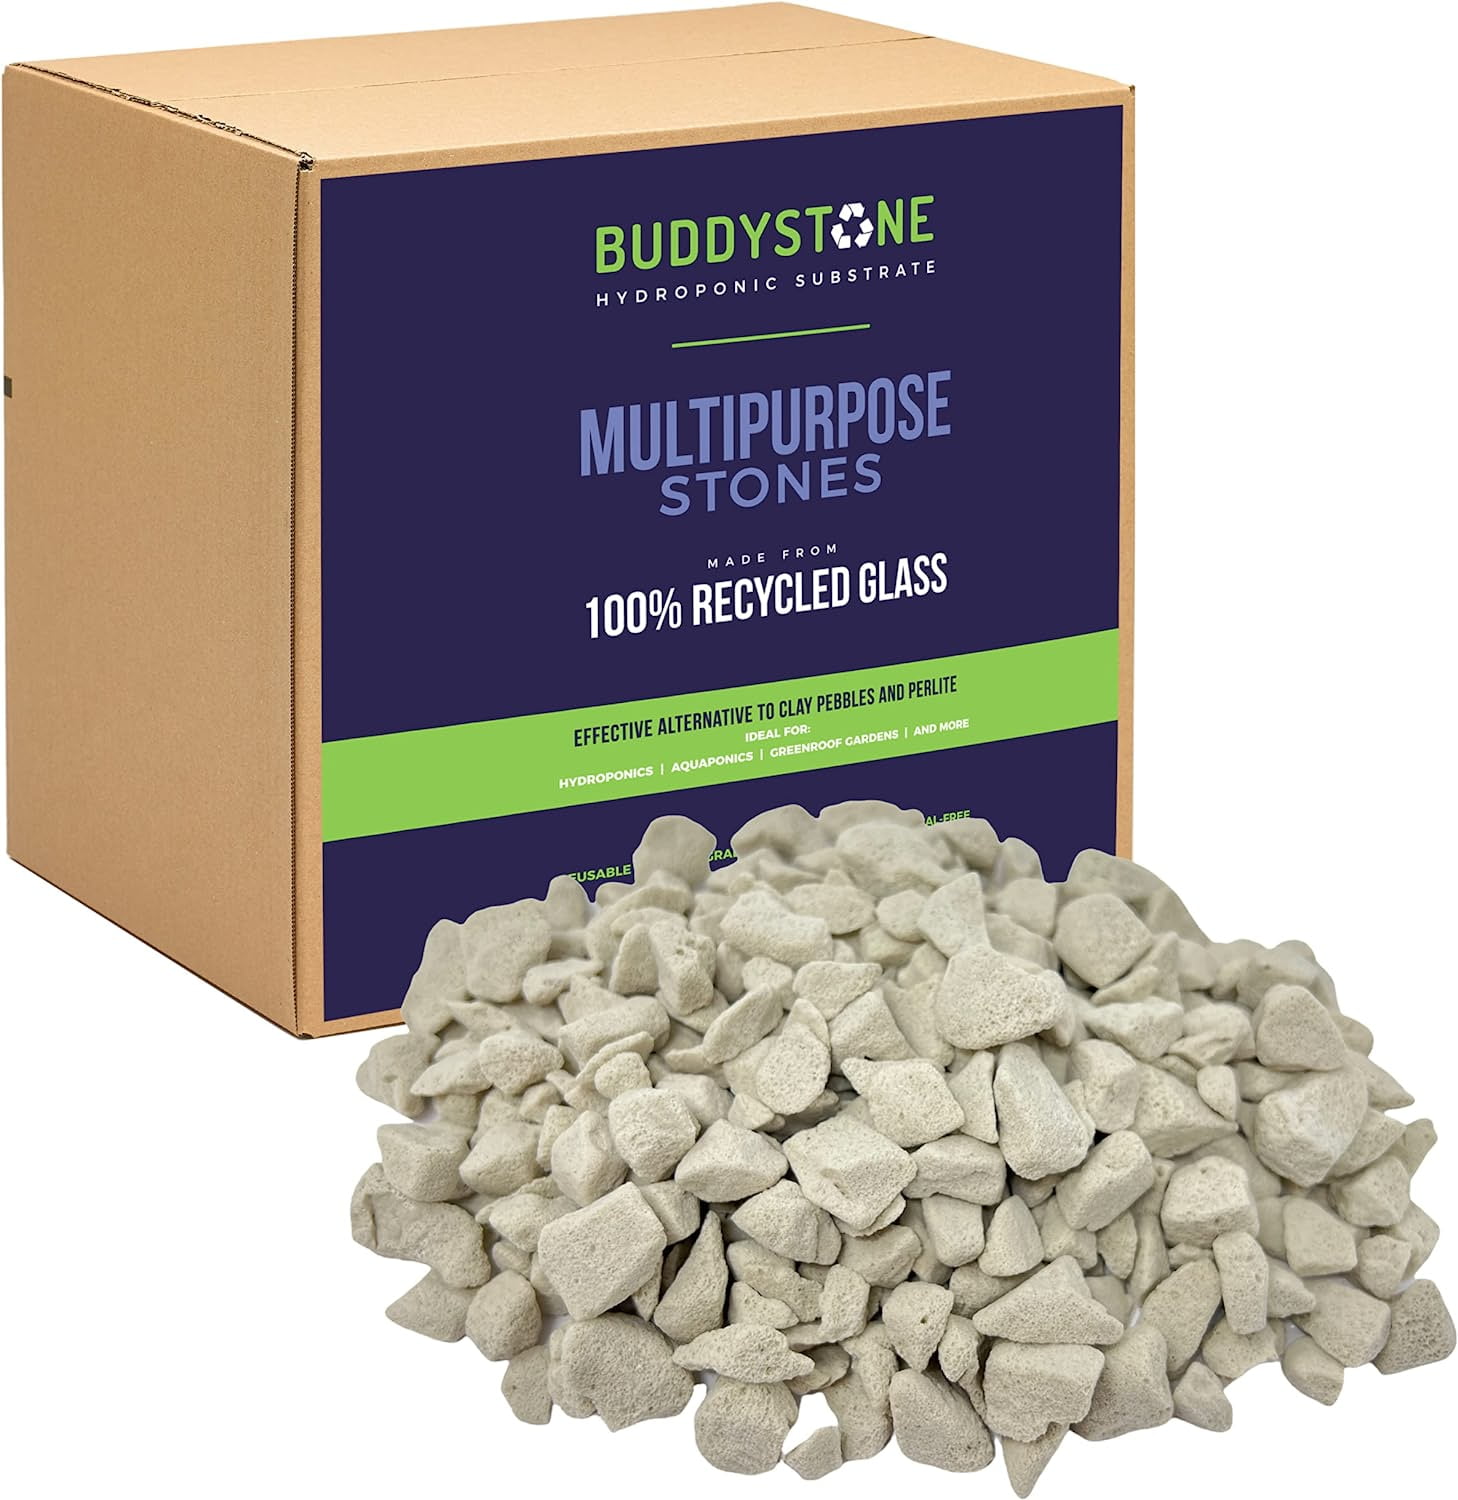 Platinium HydroStone 60 series -  Wholesale Hydroponic Systems and  Grow Lights